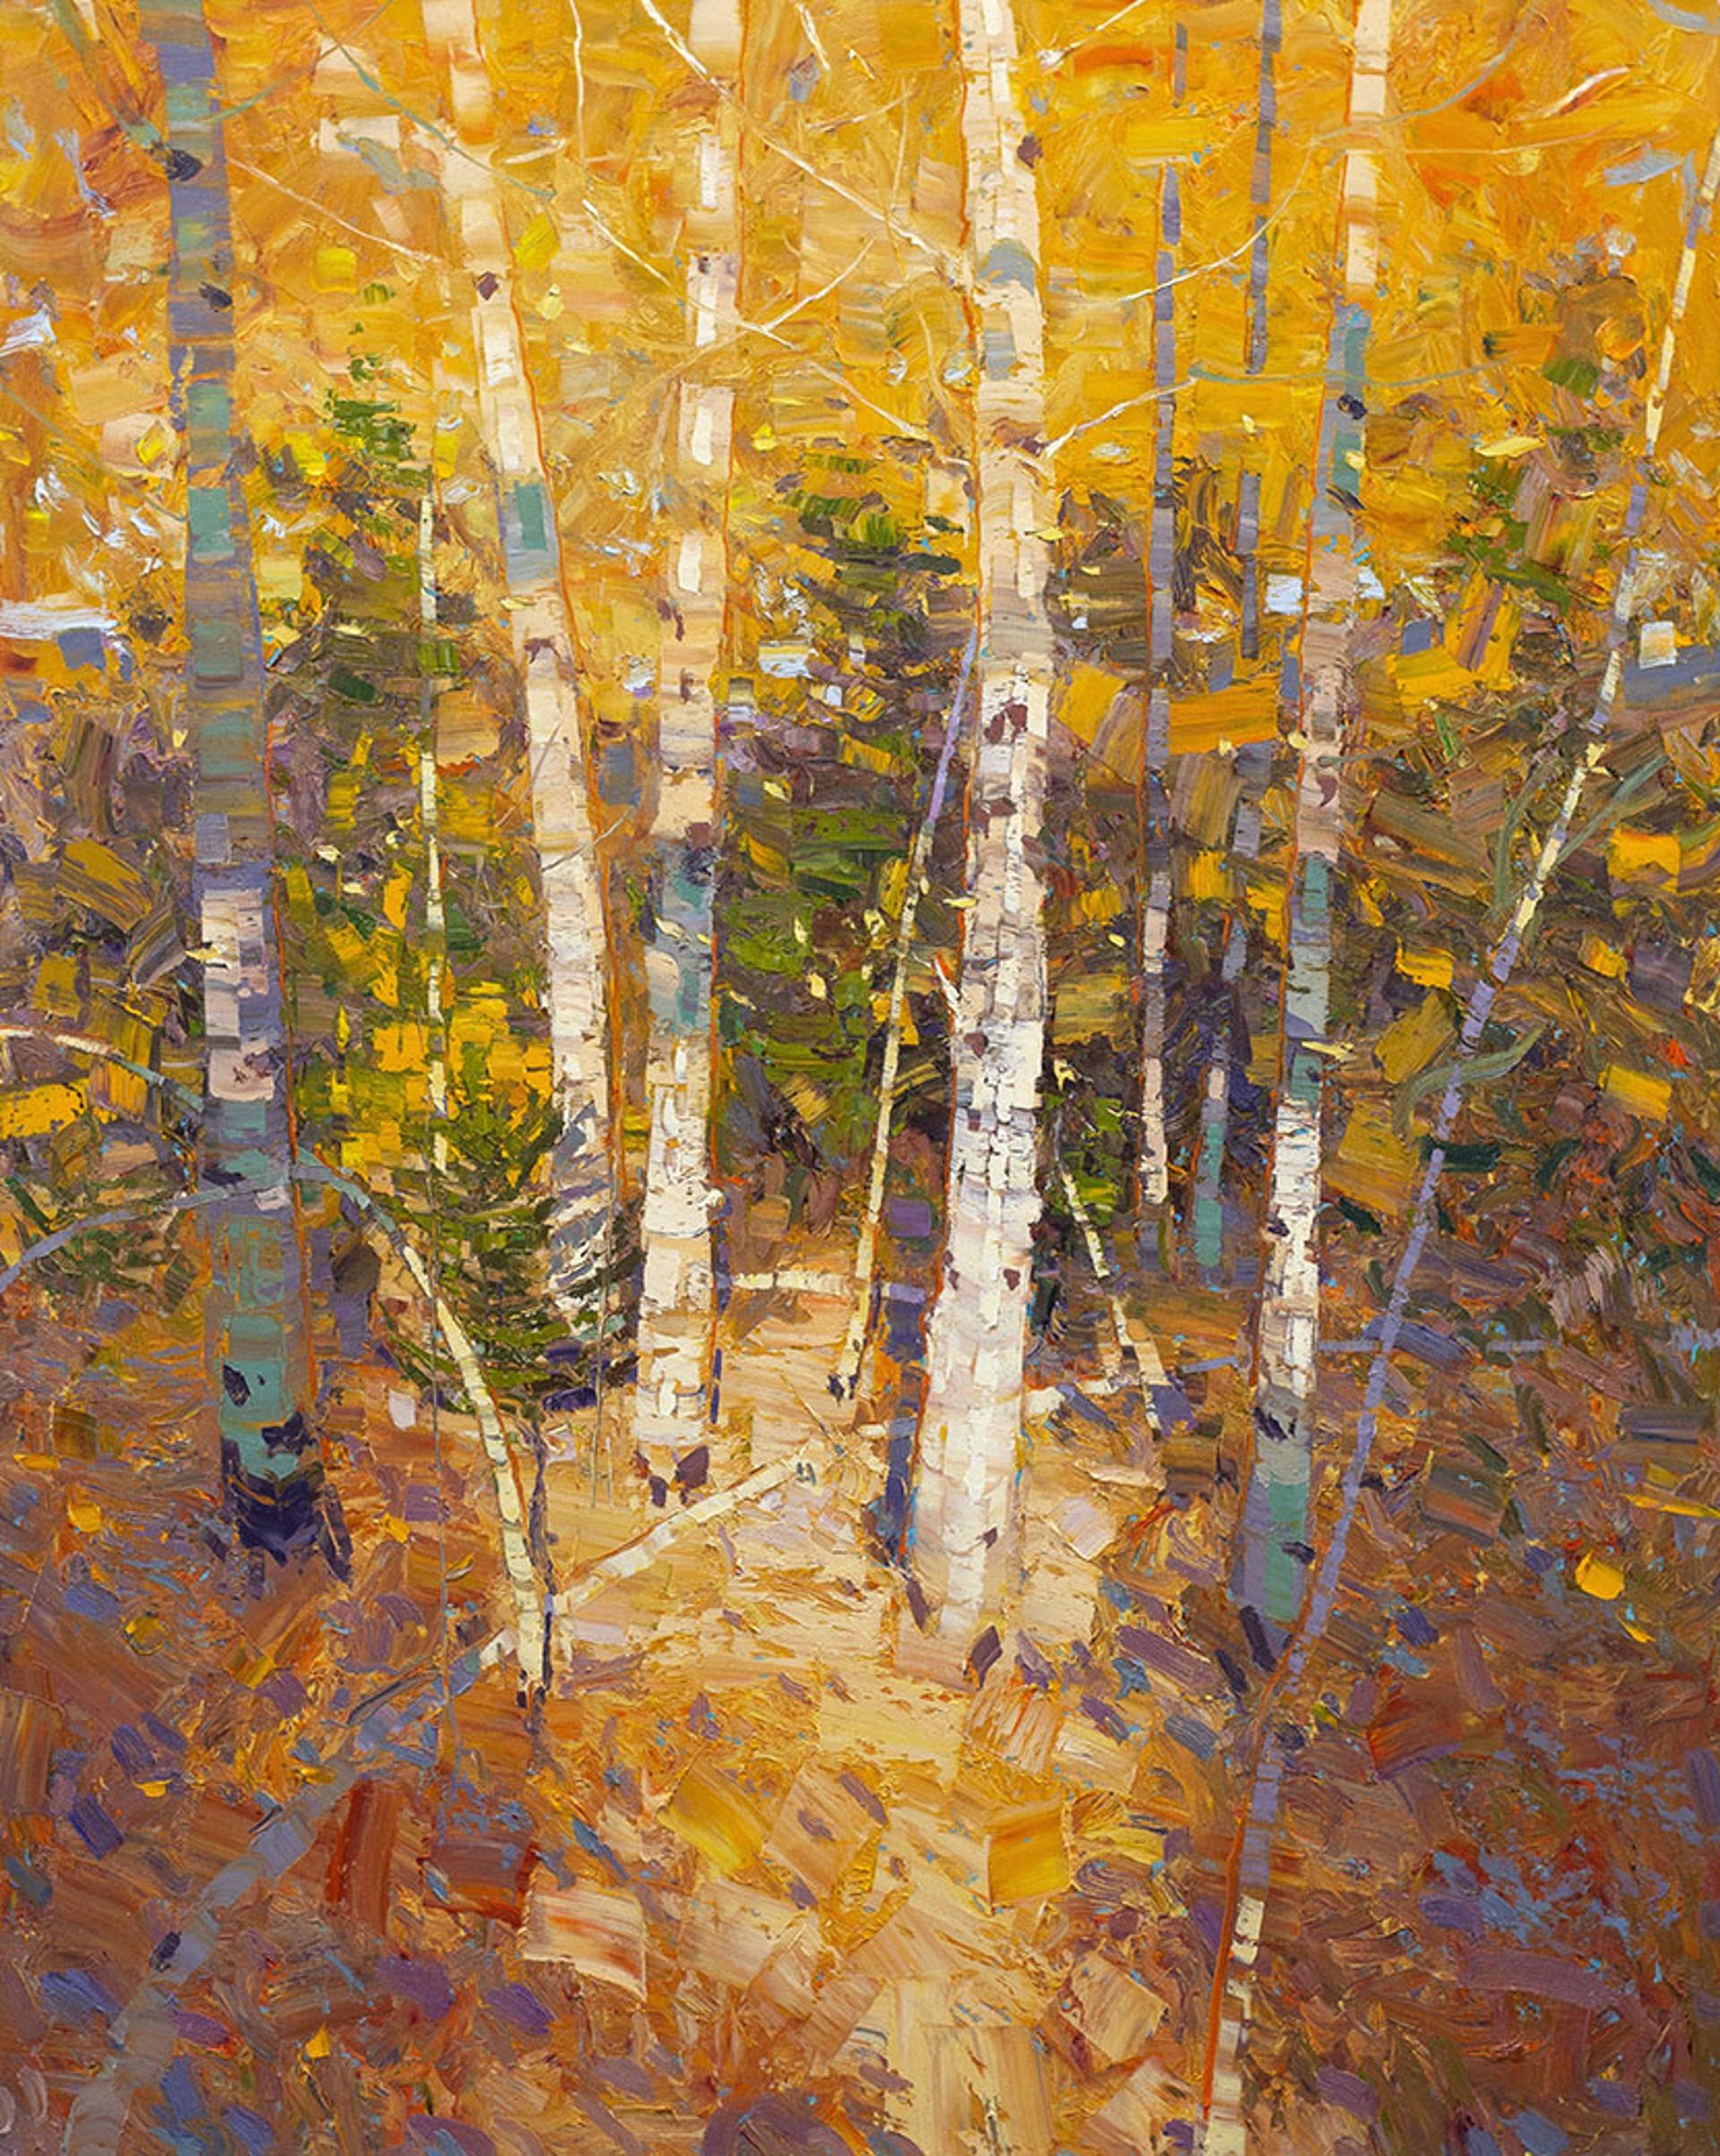 Original Oil Painting By Silas Thompson Of Aspens In A Forest